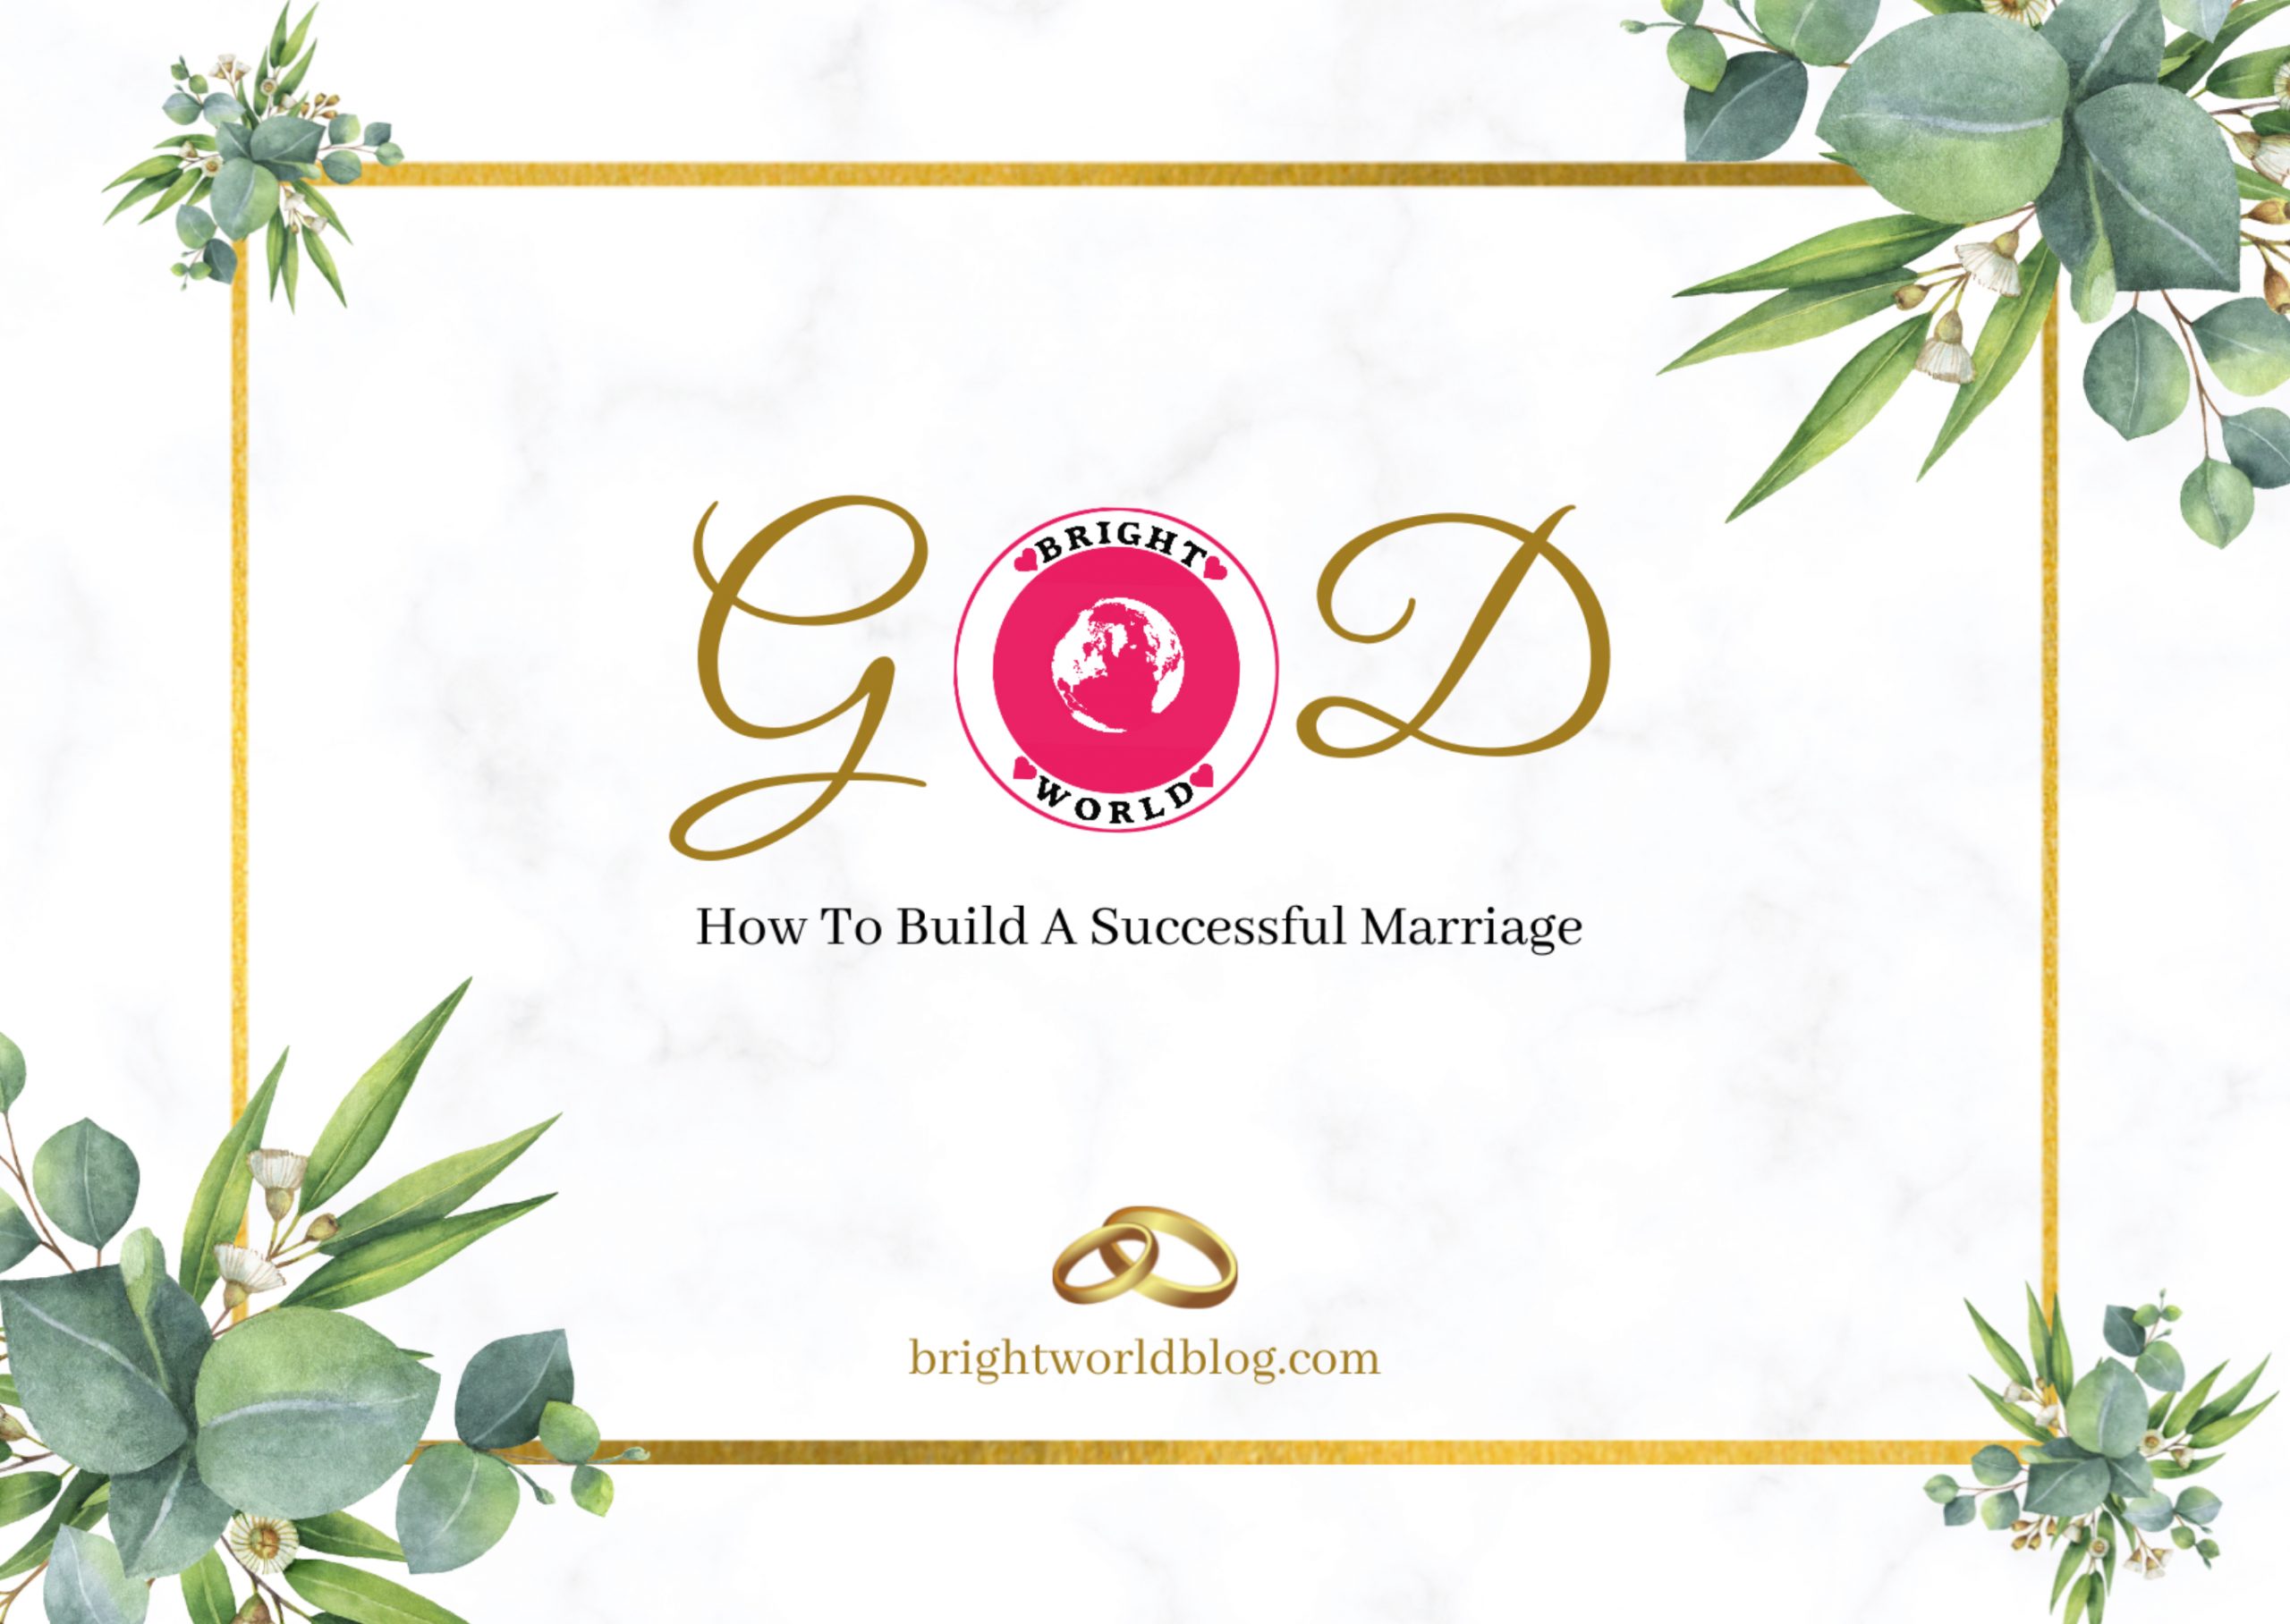 How to build a successful marriage - brightworldblog.com